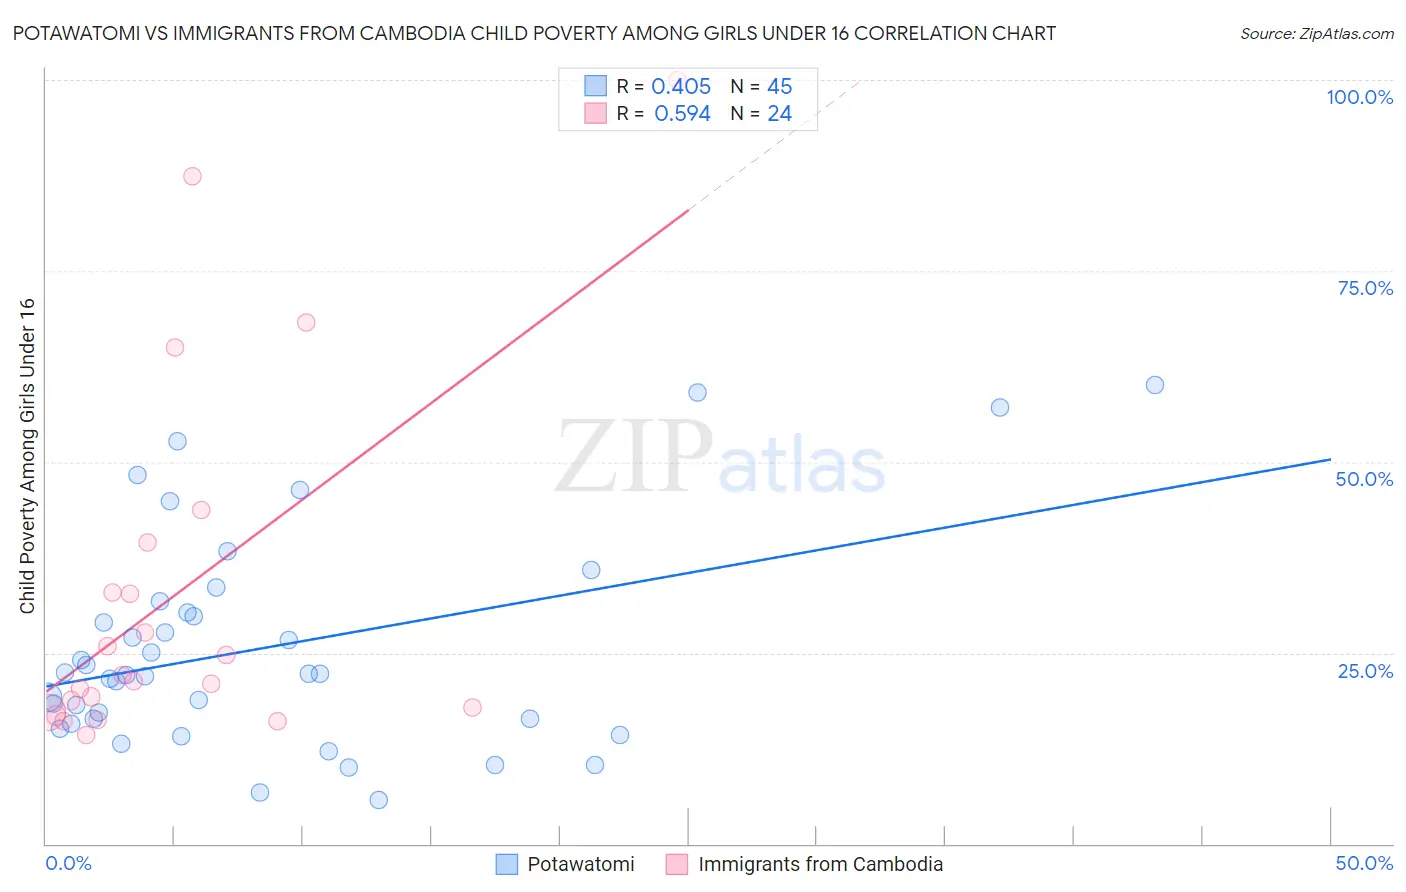 Potawatomi vs Immigrants from Cambodia Child Poverty Among Girls Under 16